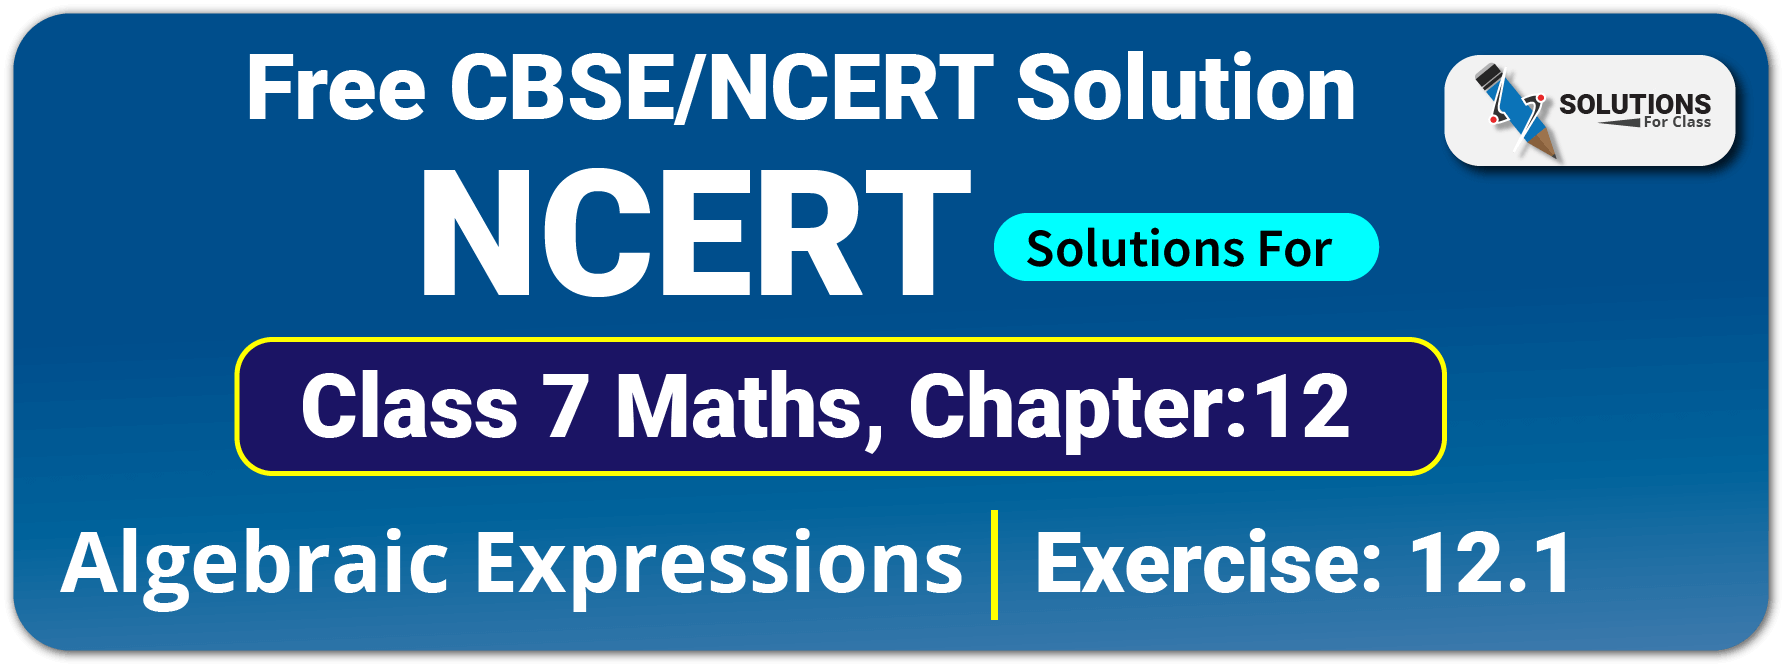 NCERT Solutions For Class 7 Maths Chapter 12 Algebraic Expressions Exercise 12.1